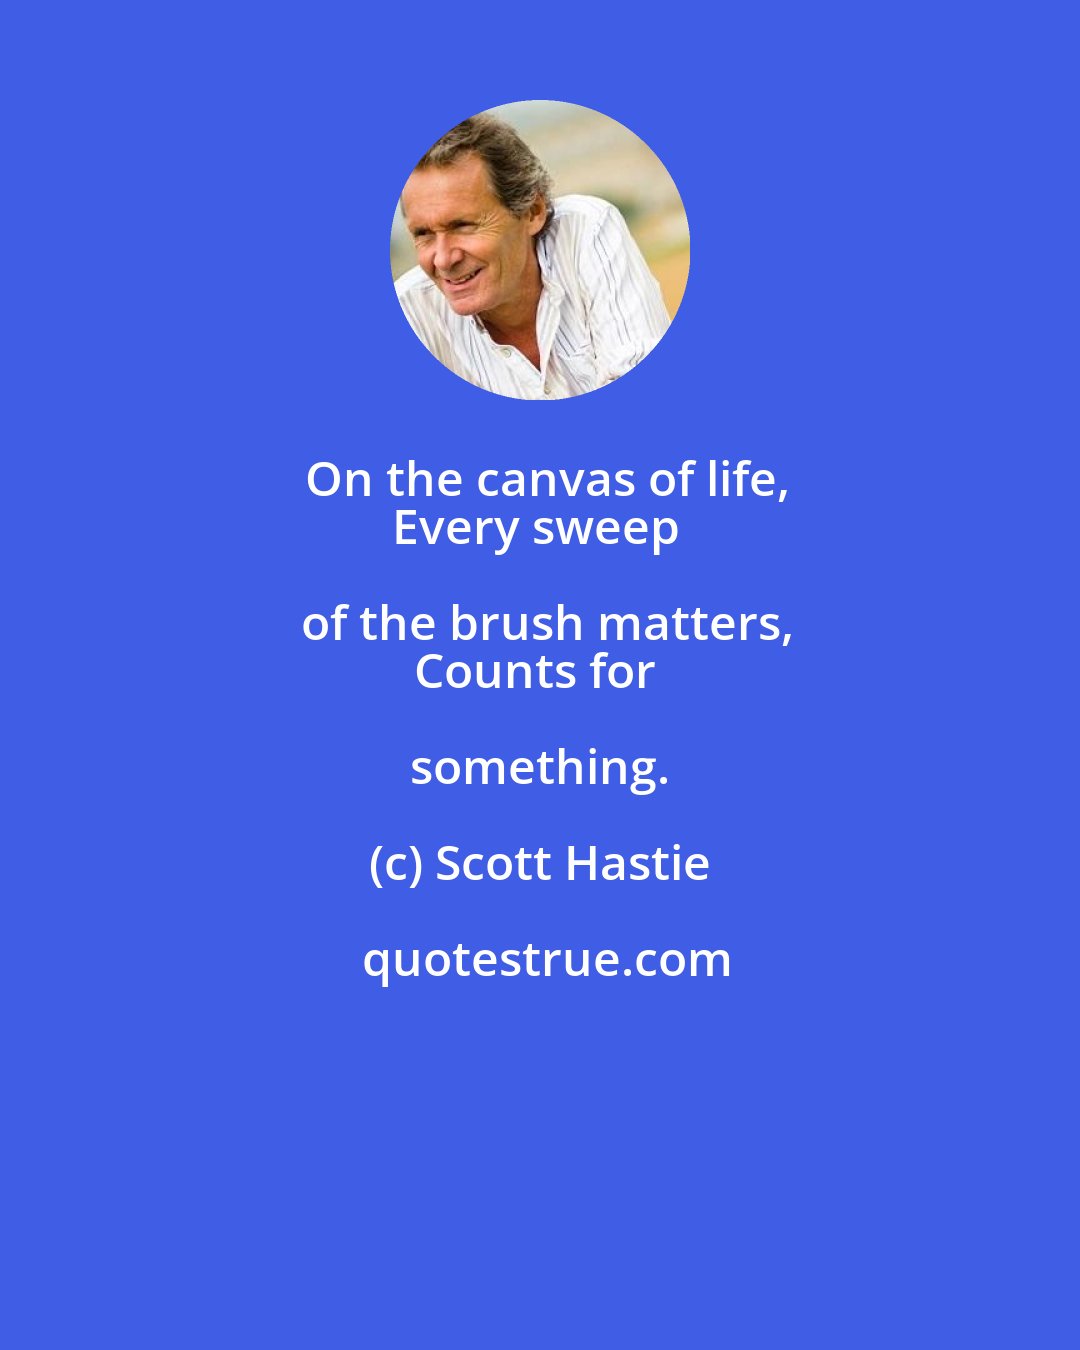 Scott Hastie: On the canvas of life,
Every sweep of the brush matters,
Counts for something.